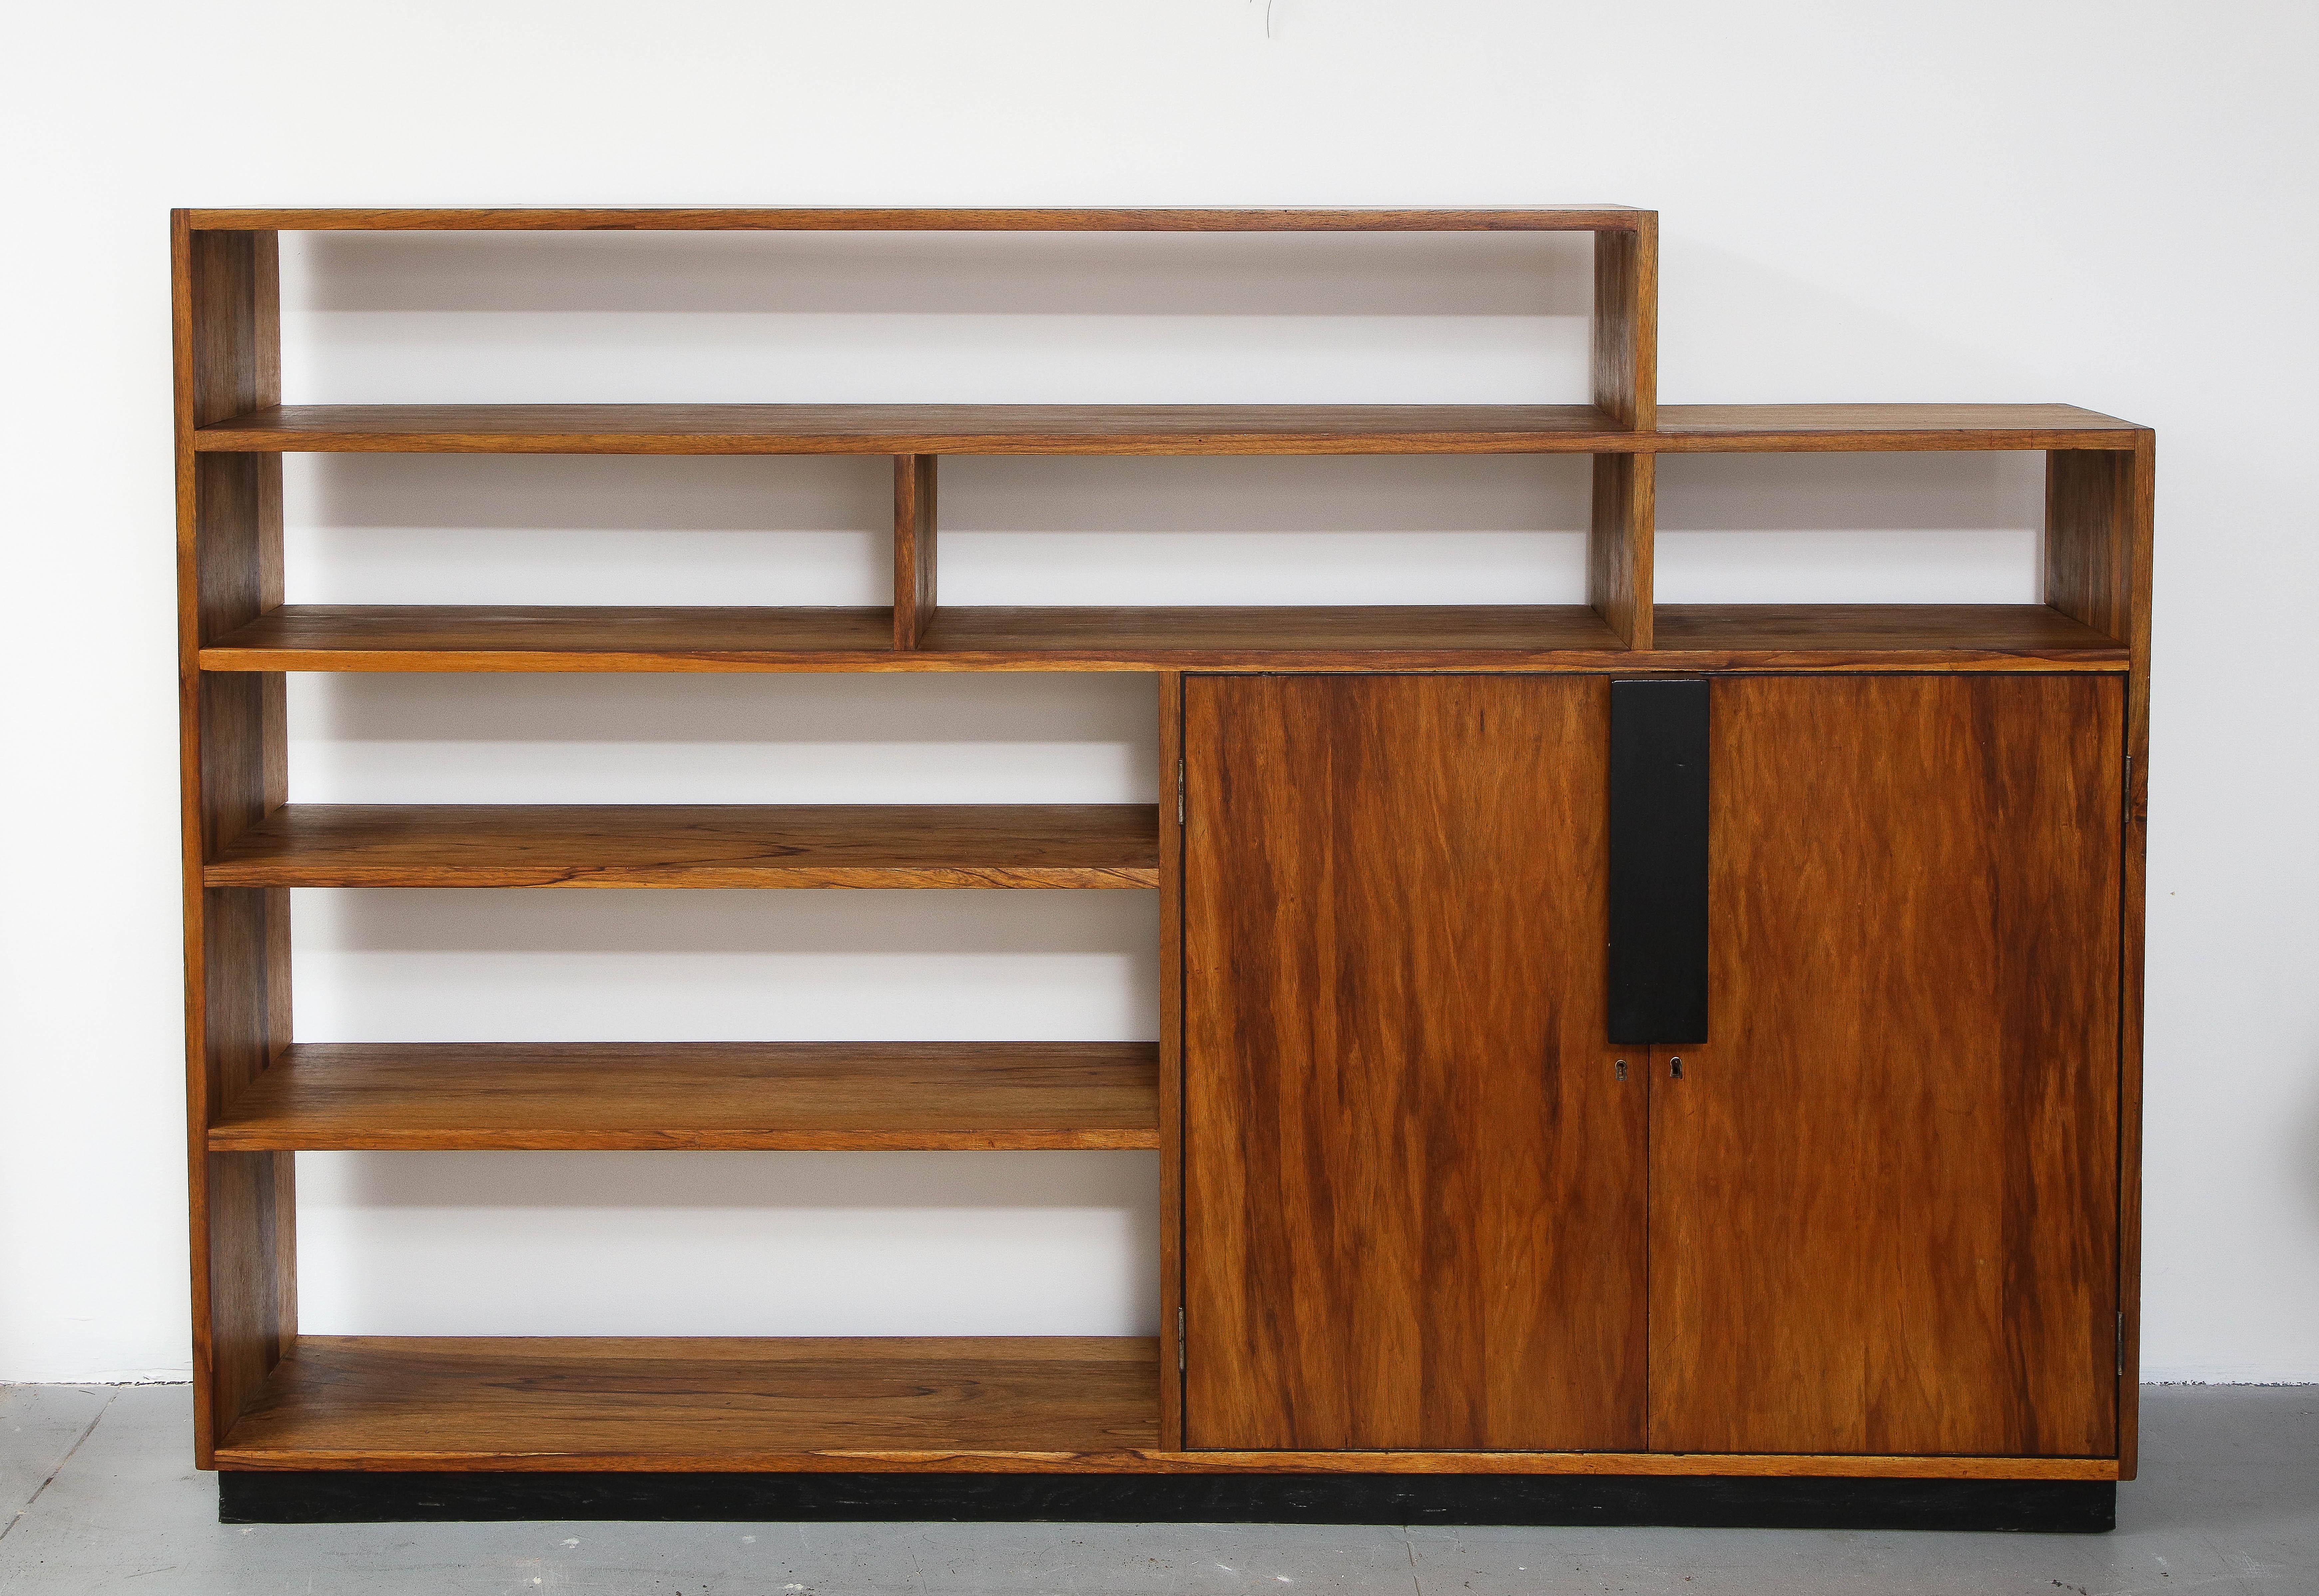 Uniquely made for an architect, hand-crafted solid wood bookcase & cabinet, Brussels, Belgium, 1940’s 
Dovetailed corners, original lock/key.
Measures: H: 53.5 / 45 D: 13.25 L: 78.75 in.